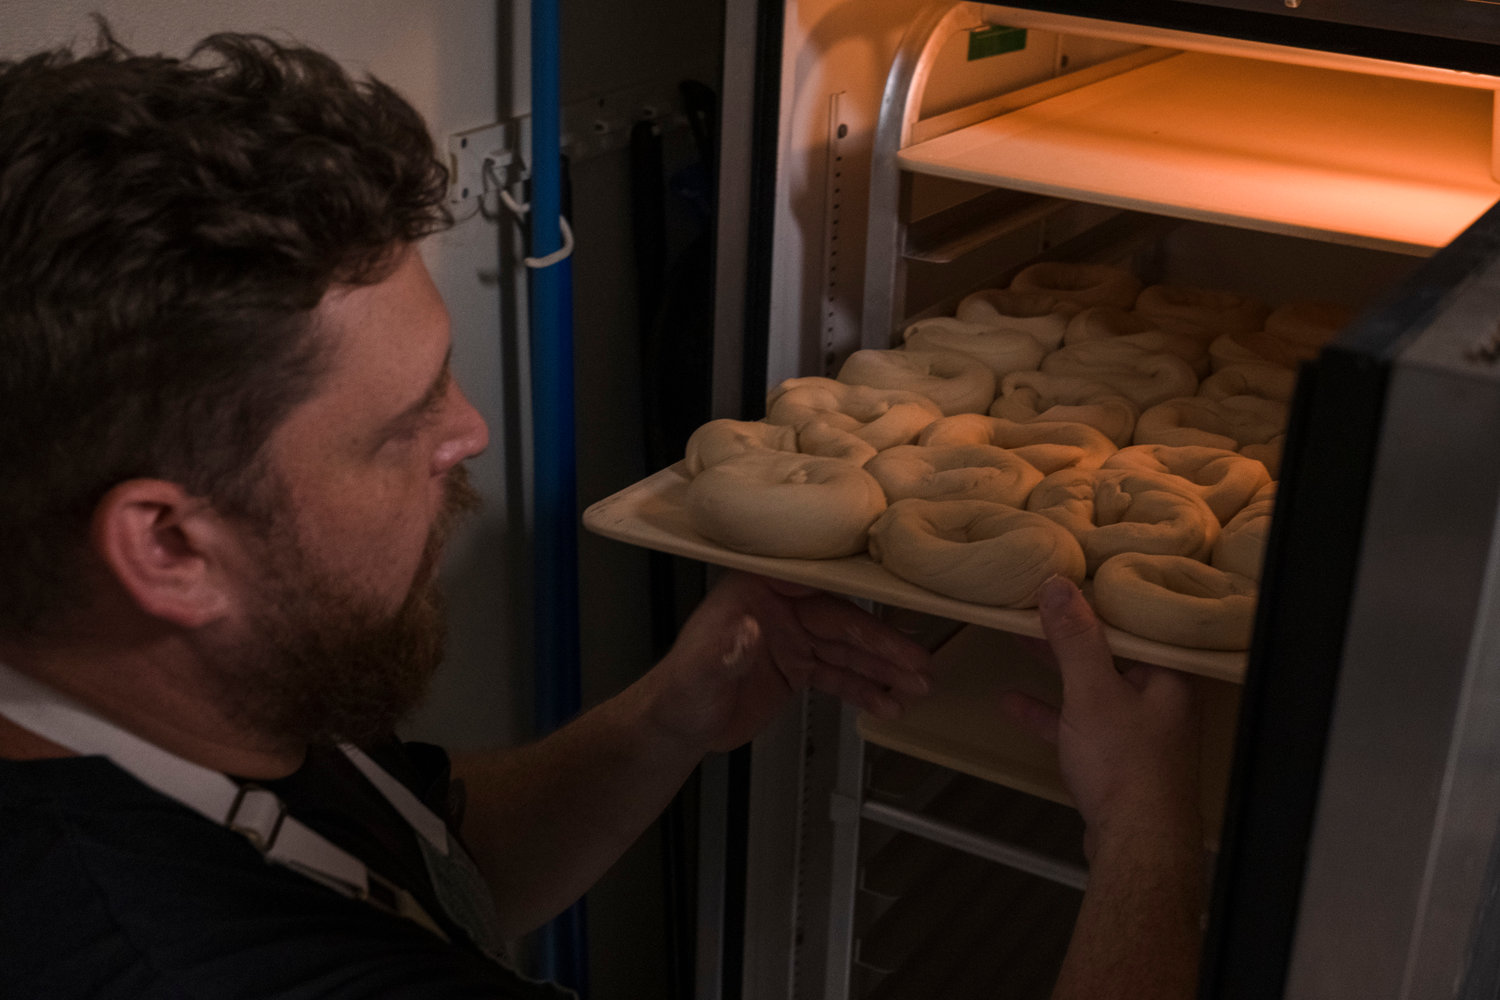 The dough circles go into a proofing box to slowly rise for 24 hours before they take a bath in a hot water solution that gives them the hard shell and the soft, chewy inside.